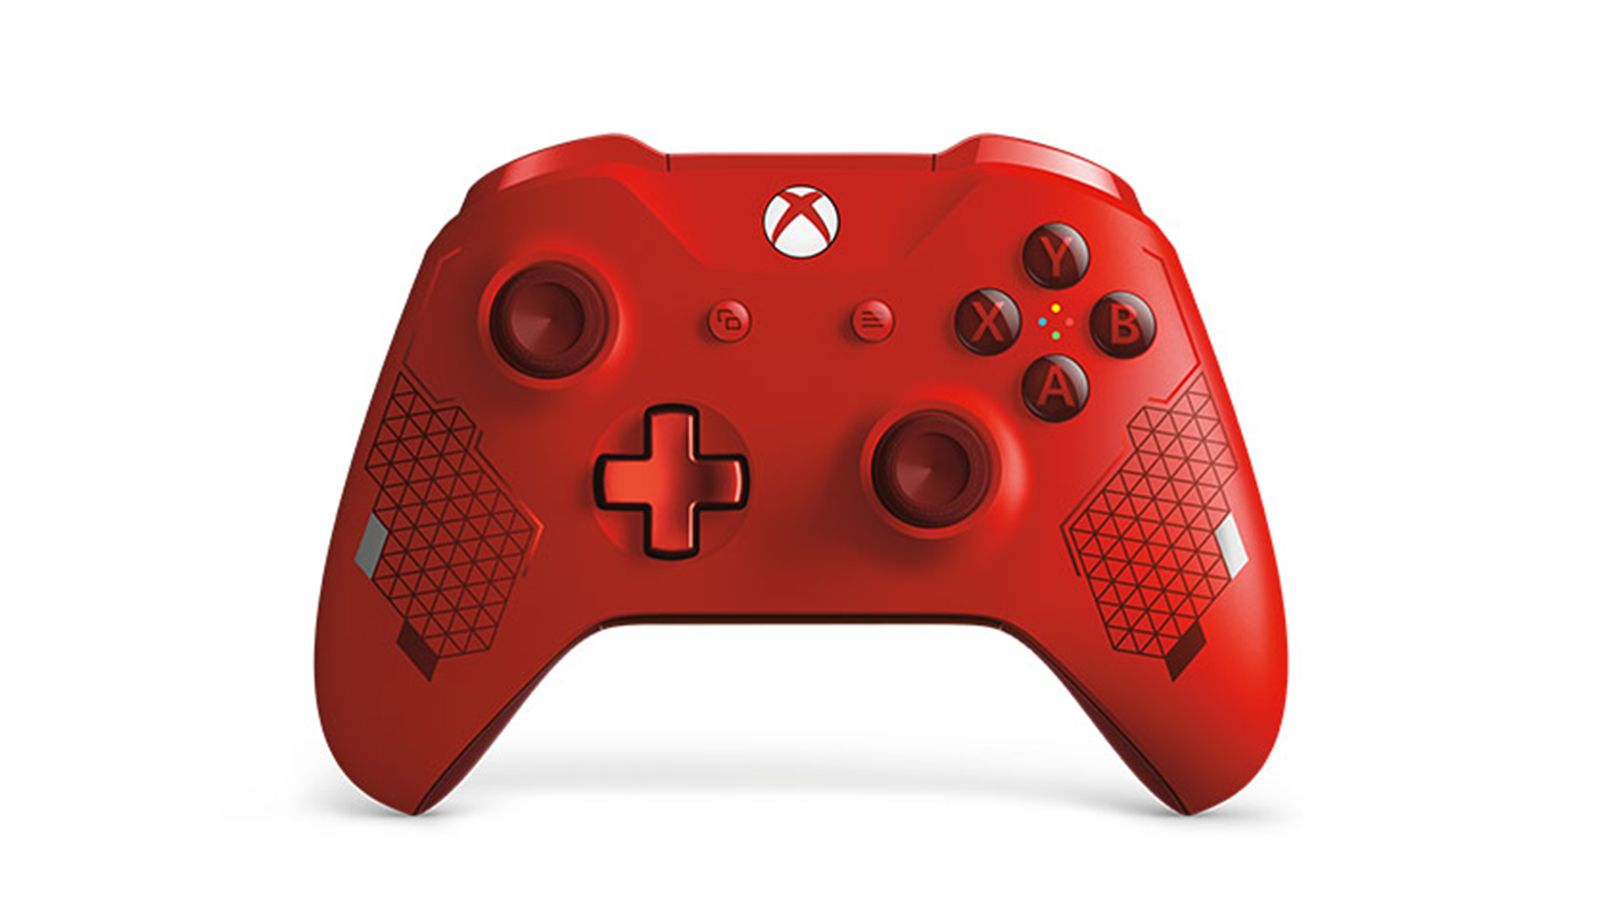 This controller sports a vibrant red metallic paint job that will certainly stand out. <br /><strong>Sport Red Special Edition Xbox Wireless Controller ($59.99, originally $69.99; </strong><a href="https://click.linksynergy.com/deeplink?id=Fr/49/7rhGg&mid=24542&u1=0607xboxe32019&murl=https%3A%2F%2Fwww.microsoft.com%2Fen-us%2Fp%2Fxbox-wireless-controller-sport-red-special-edition%2F8nhlw3sbrcqv%3Fcid%3Dmsft_web_collection%26activetab%3Dpivot%253aoverviewtab" target="_blank" target="_blank"><strong>microsoft.com</strong></a><strong>)</strong><br />